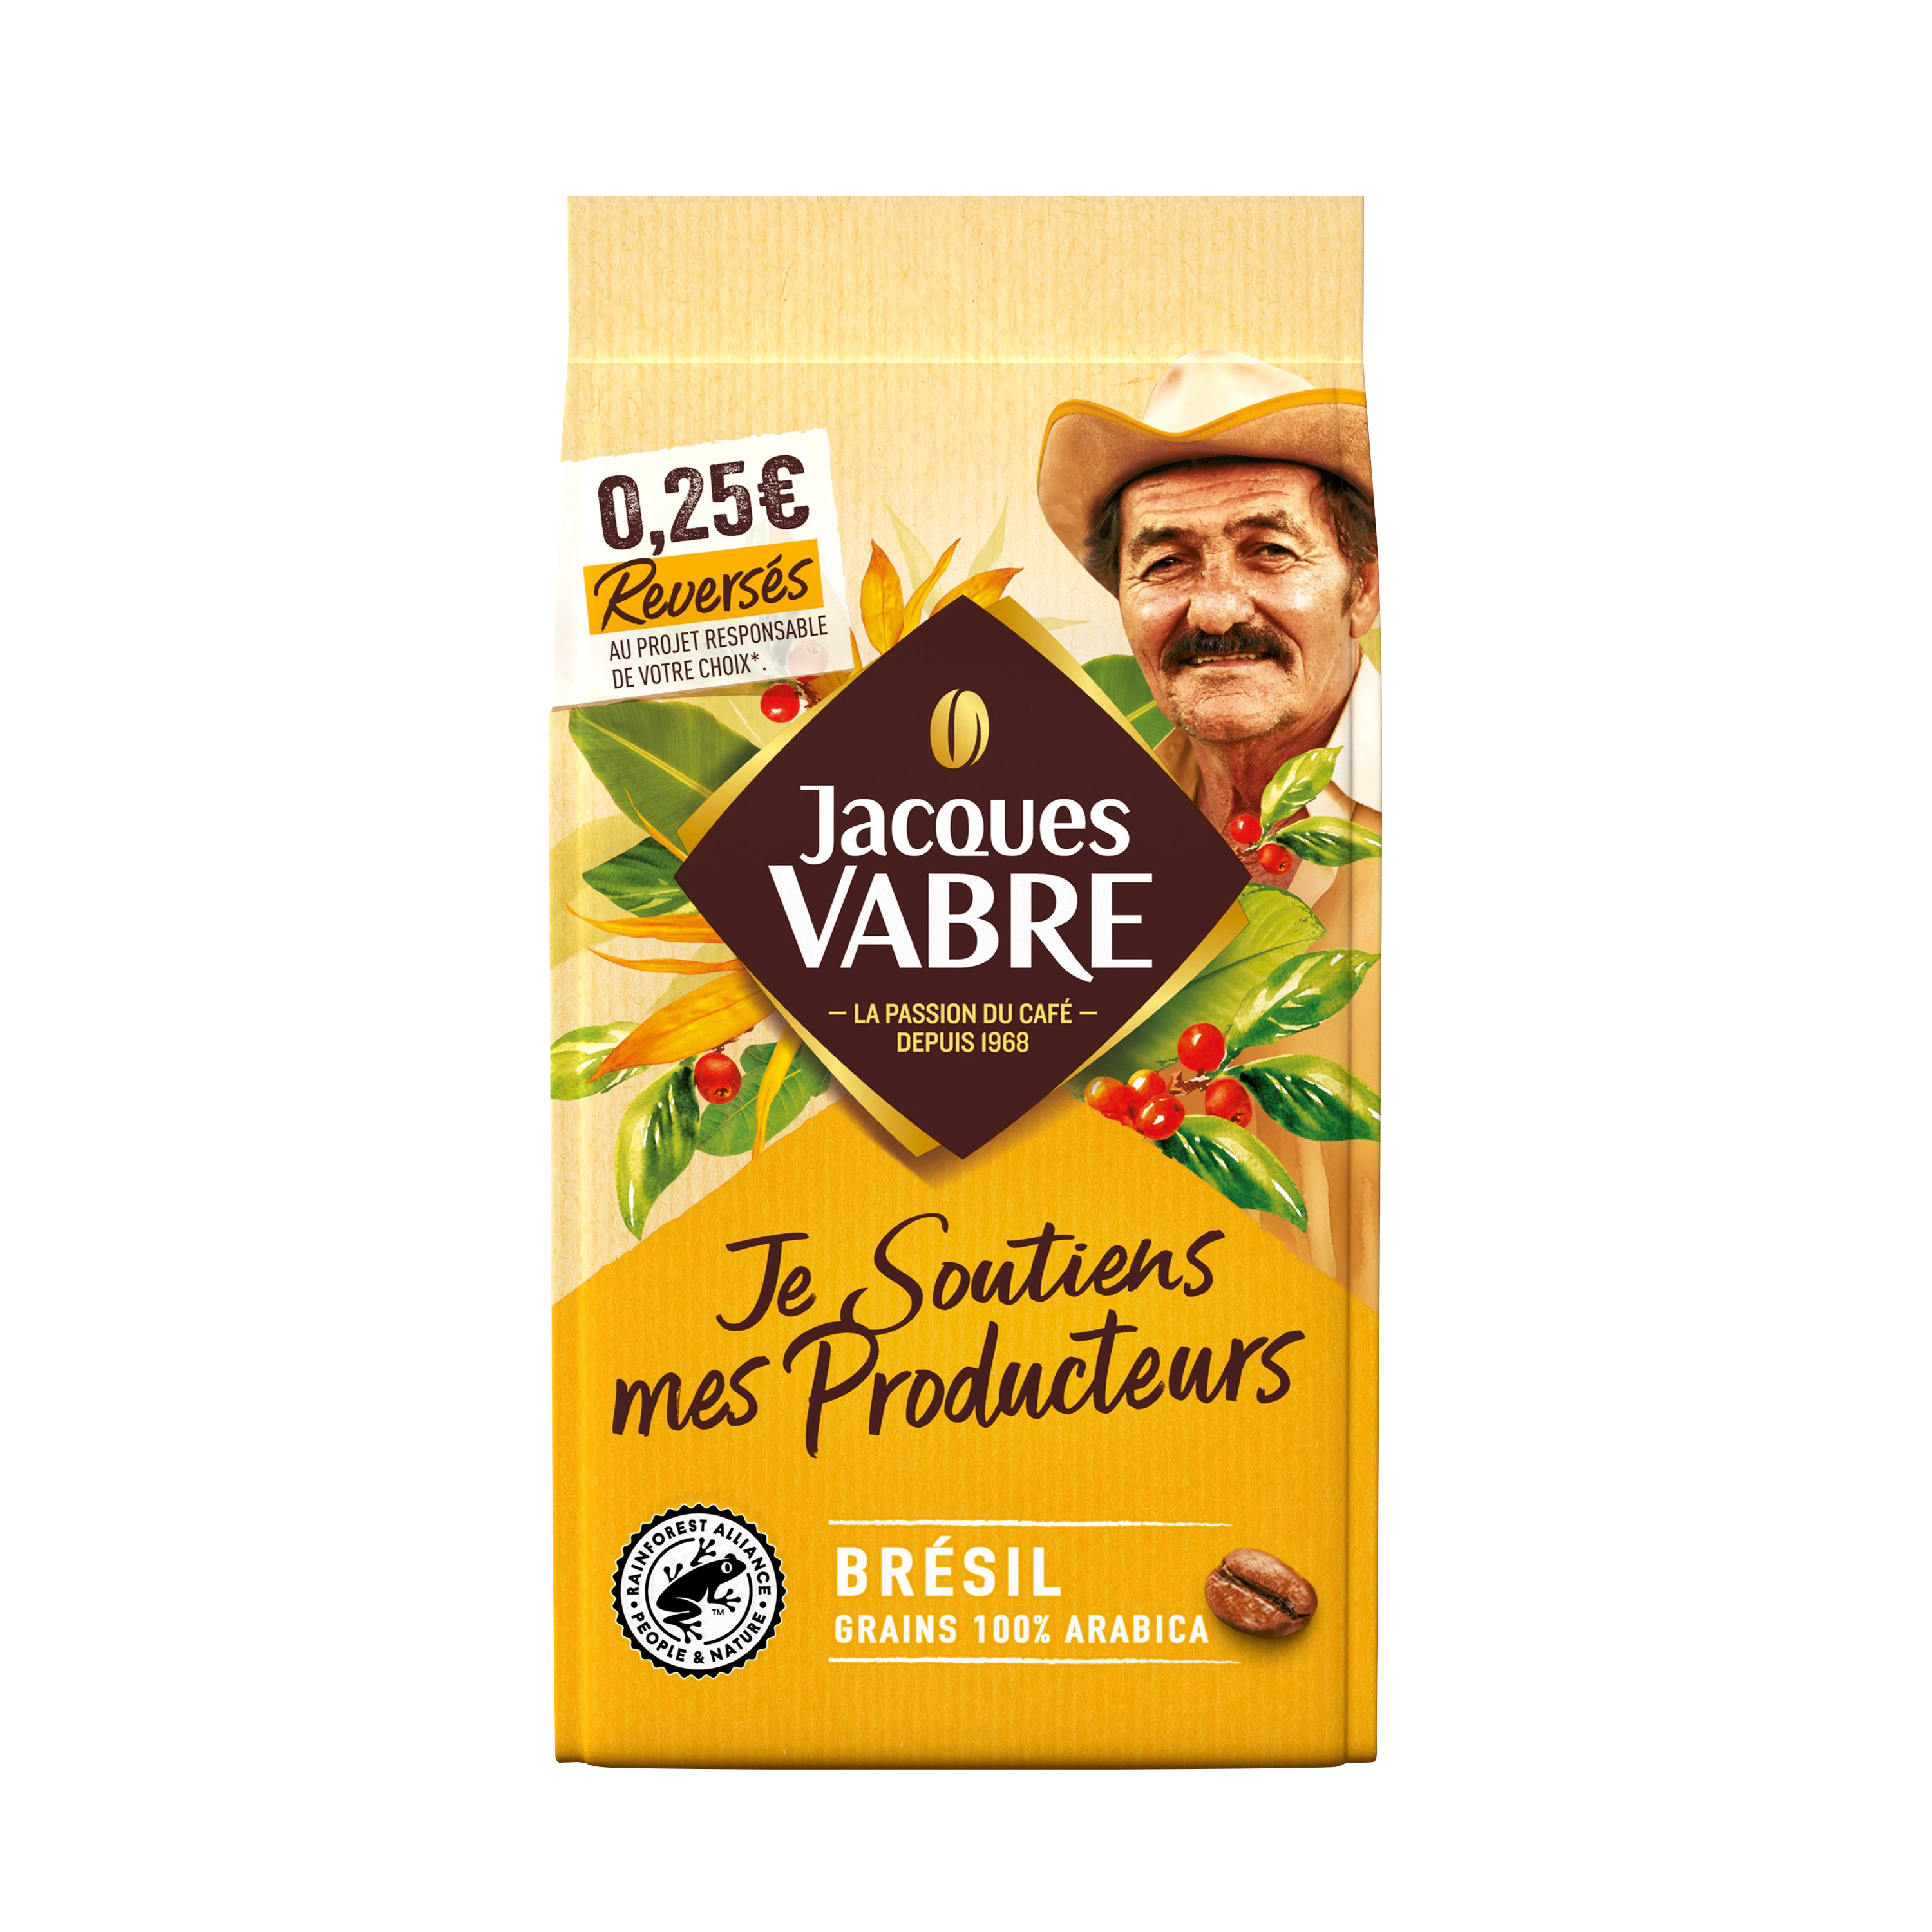 Coffee Beans from Brazil 100% Arabica; 400g - JACQUES VABRE